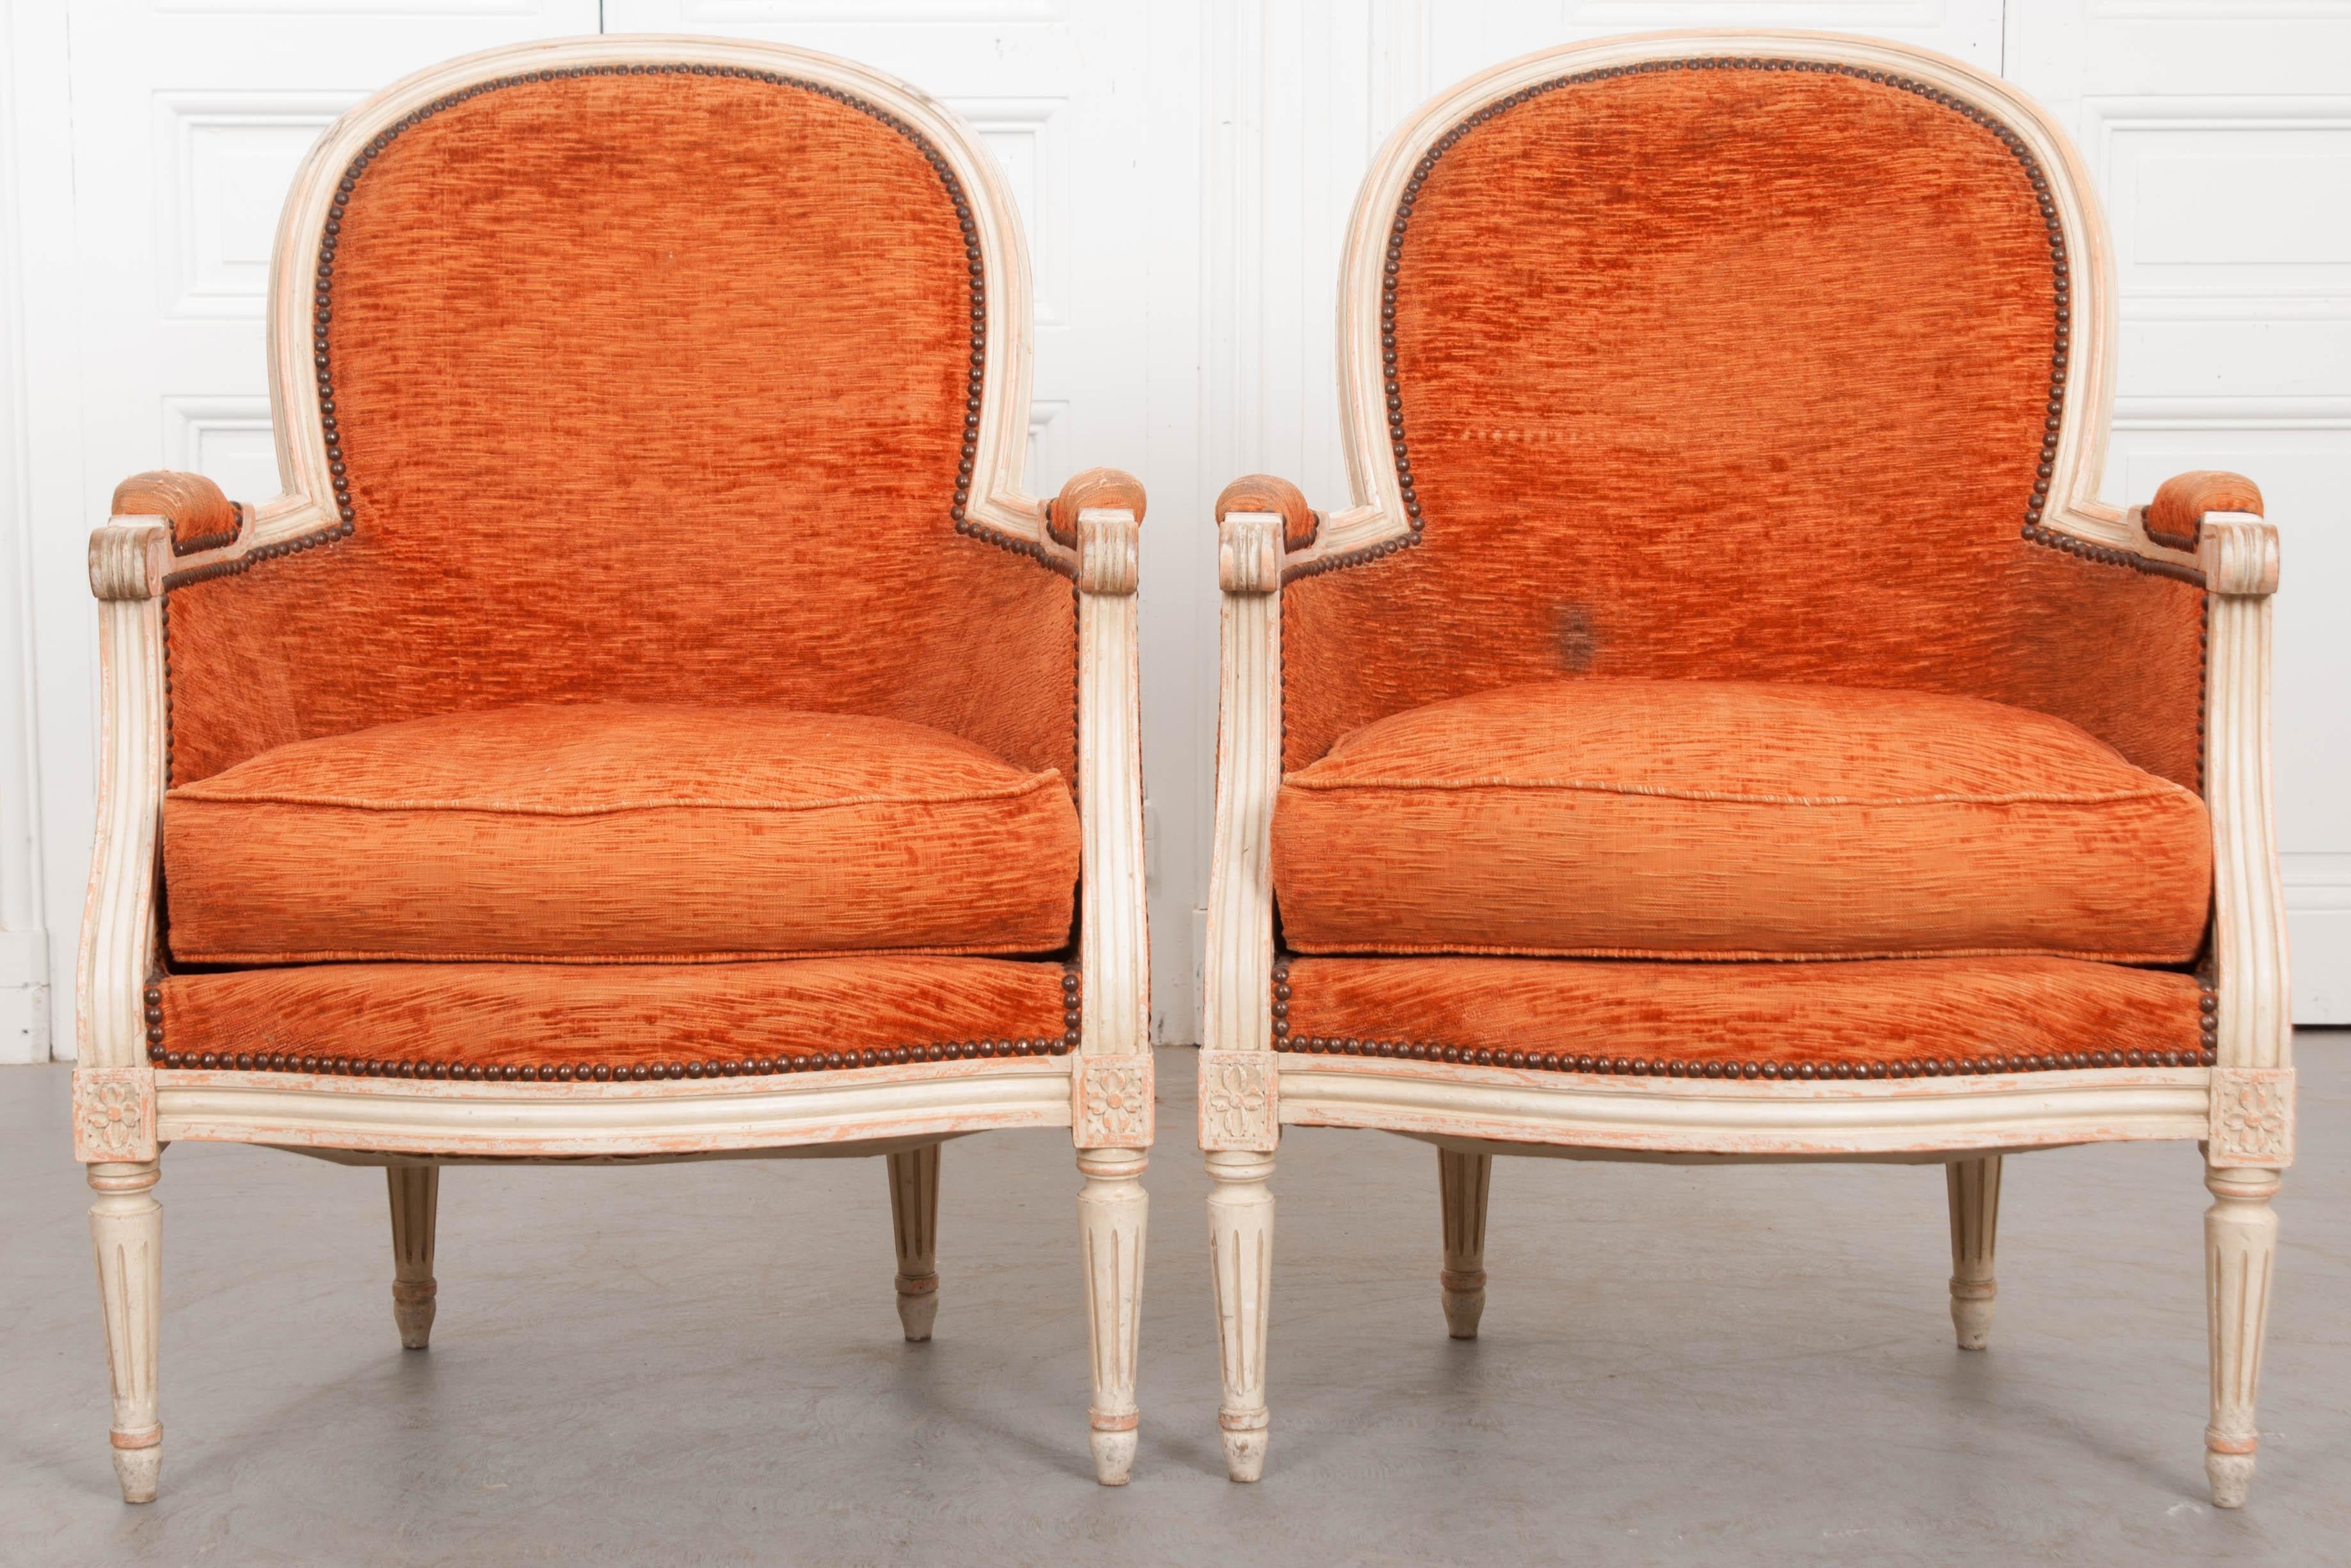 A pair of painted and upholstered French 19th century Louis XVI style bergères. The chairs date to the 1870s, when they would have been carved and painted by hand. The frames still wear their original paint, which has become beautifully worn over